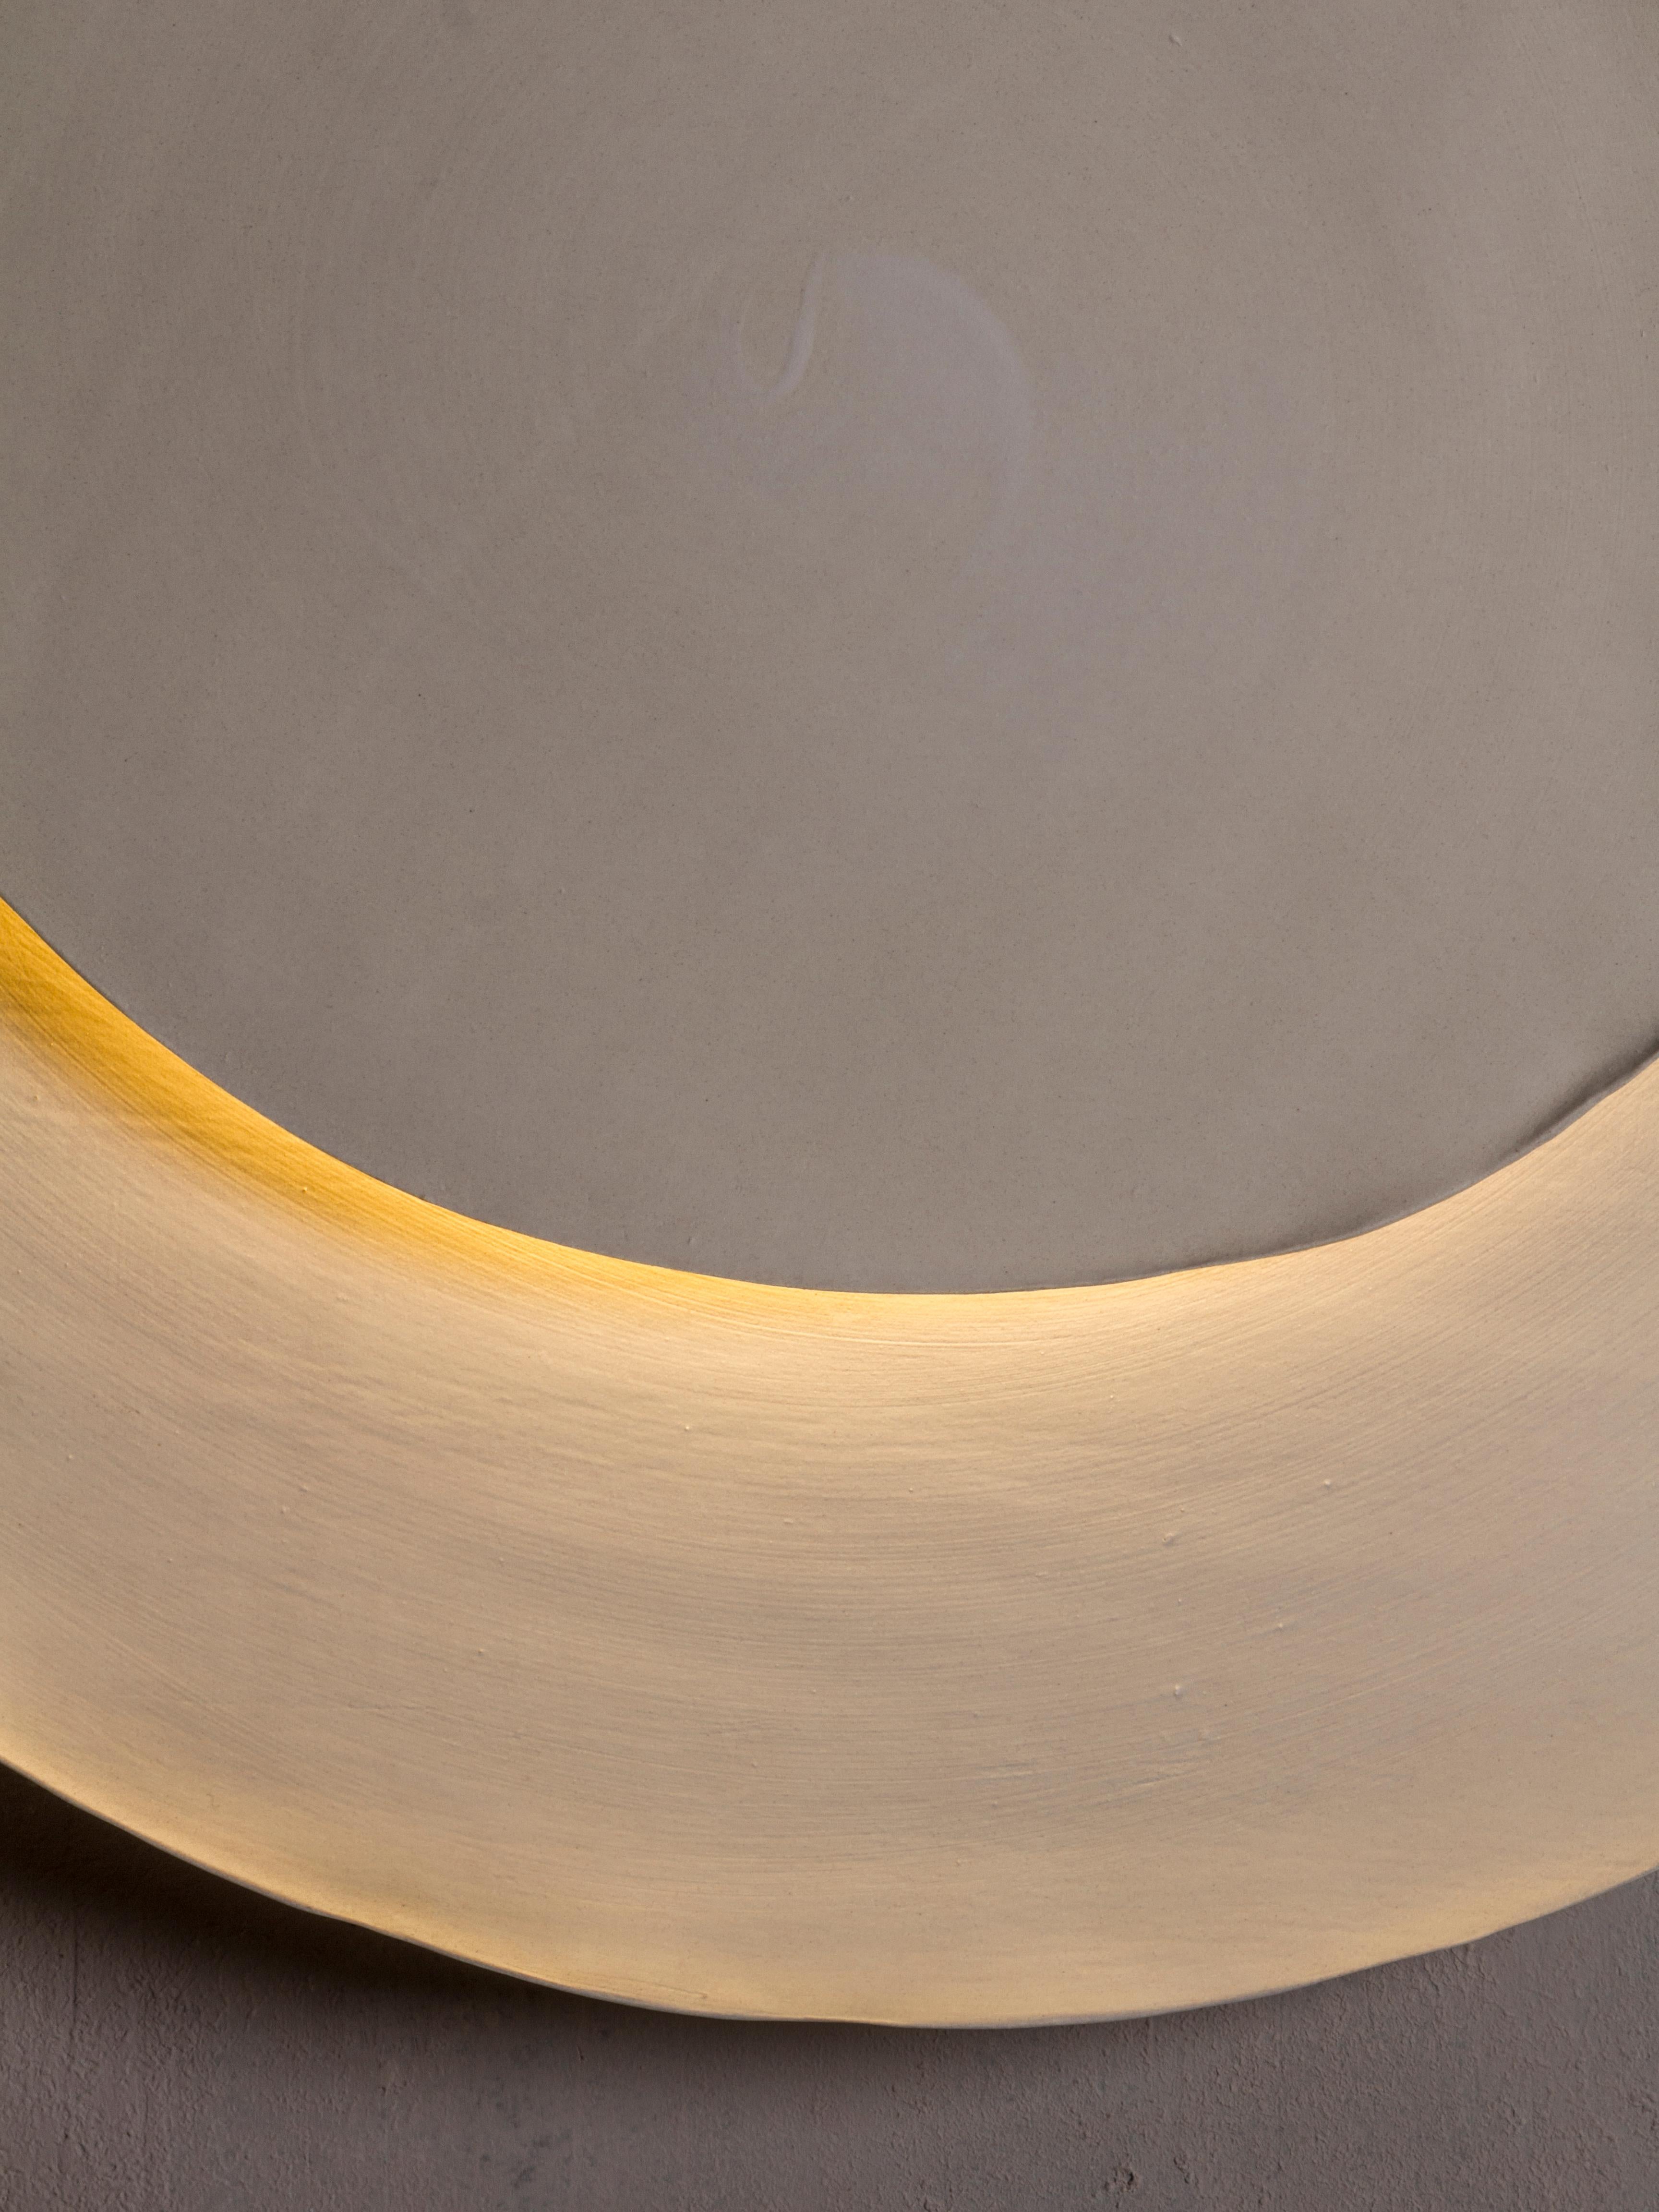 Post-Modern Silk #20 Wall Light by Margaux Leycuras For Sale